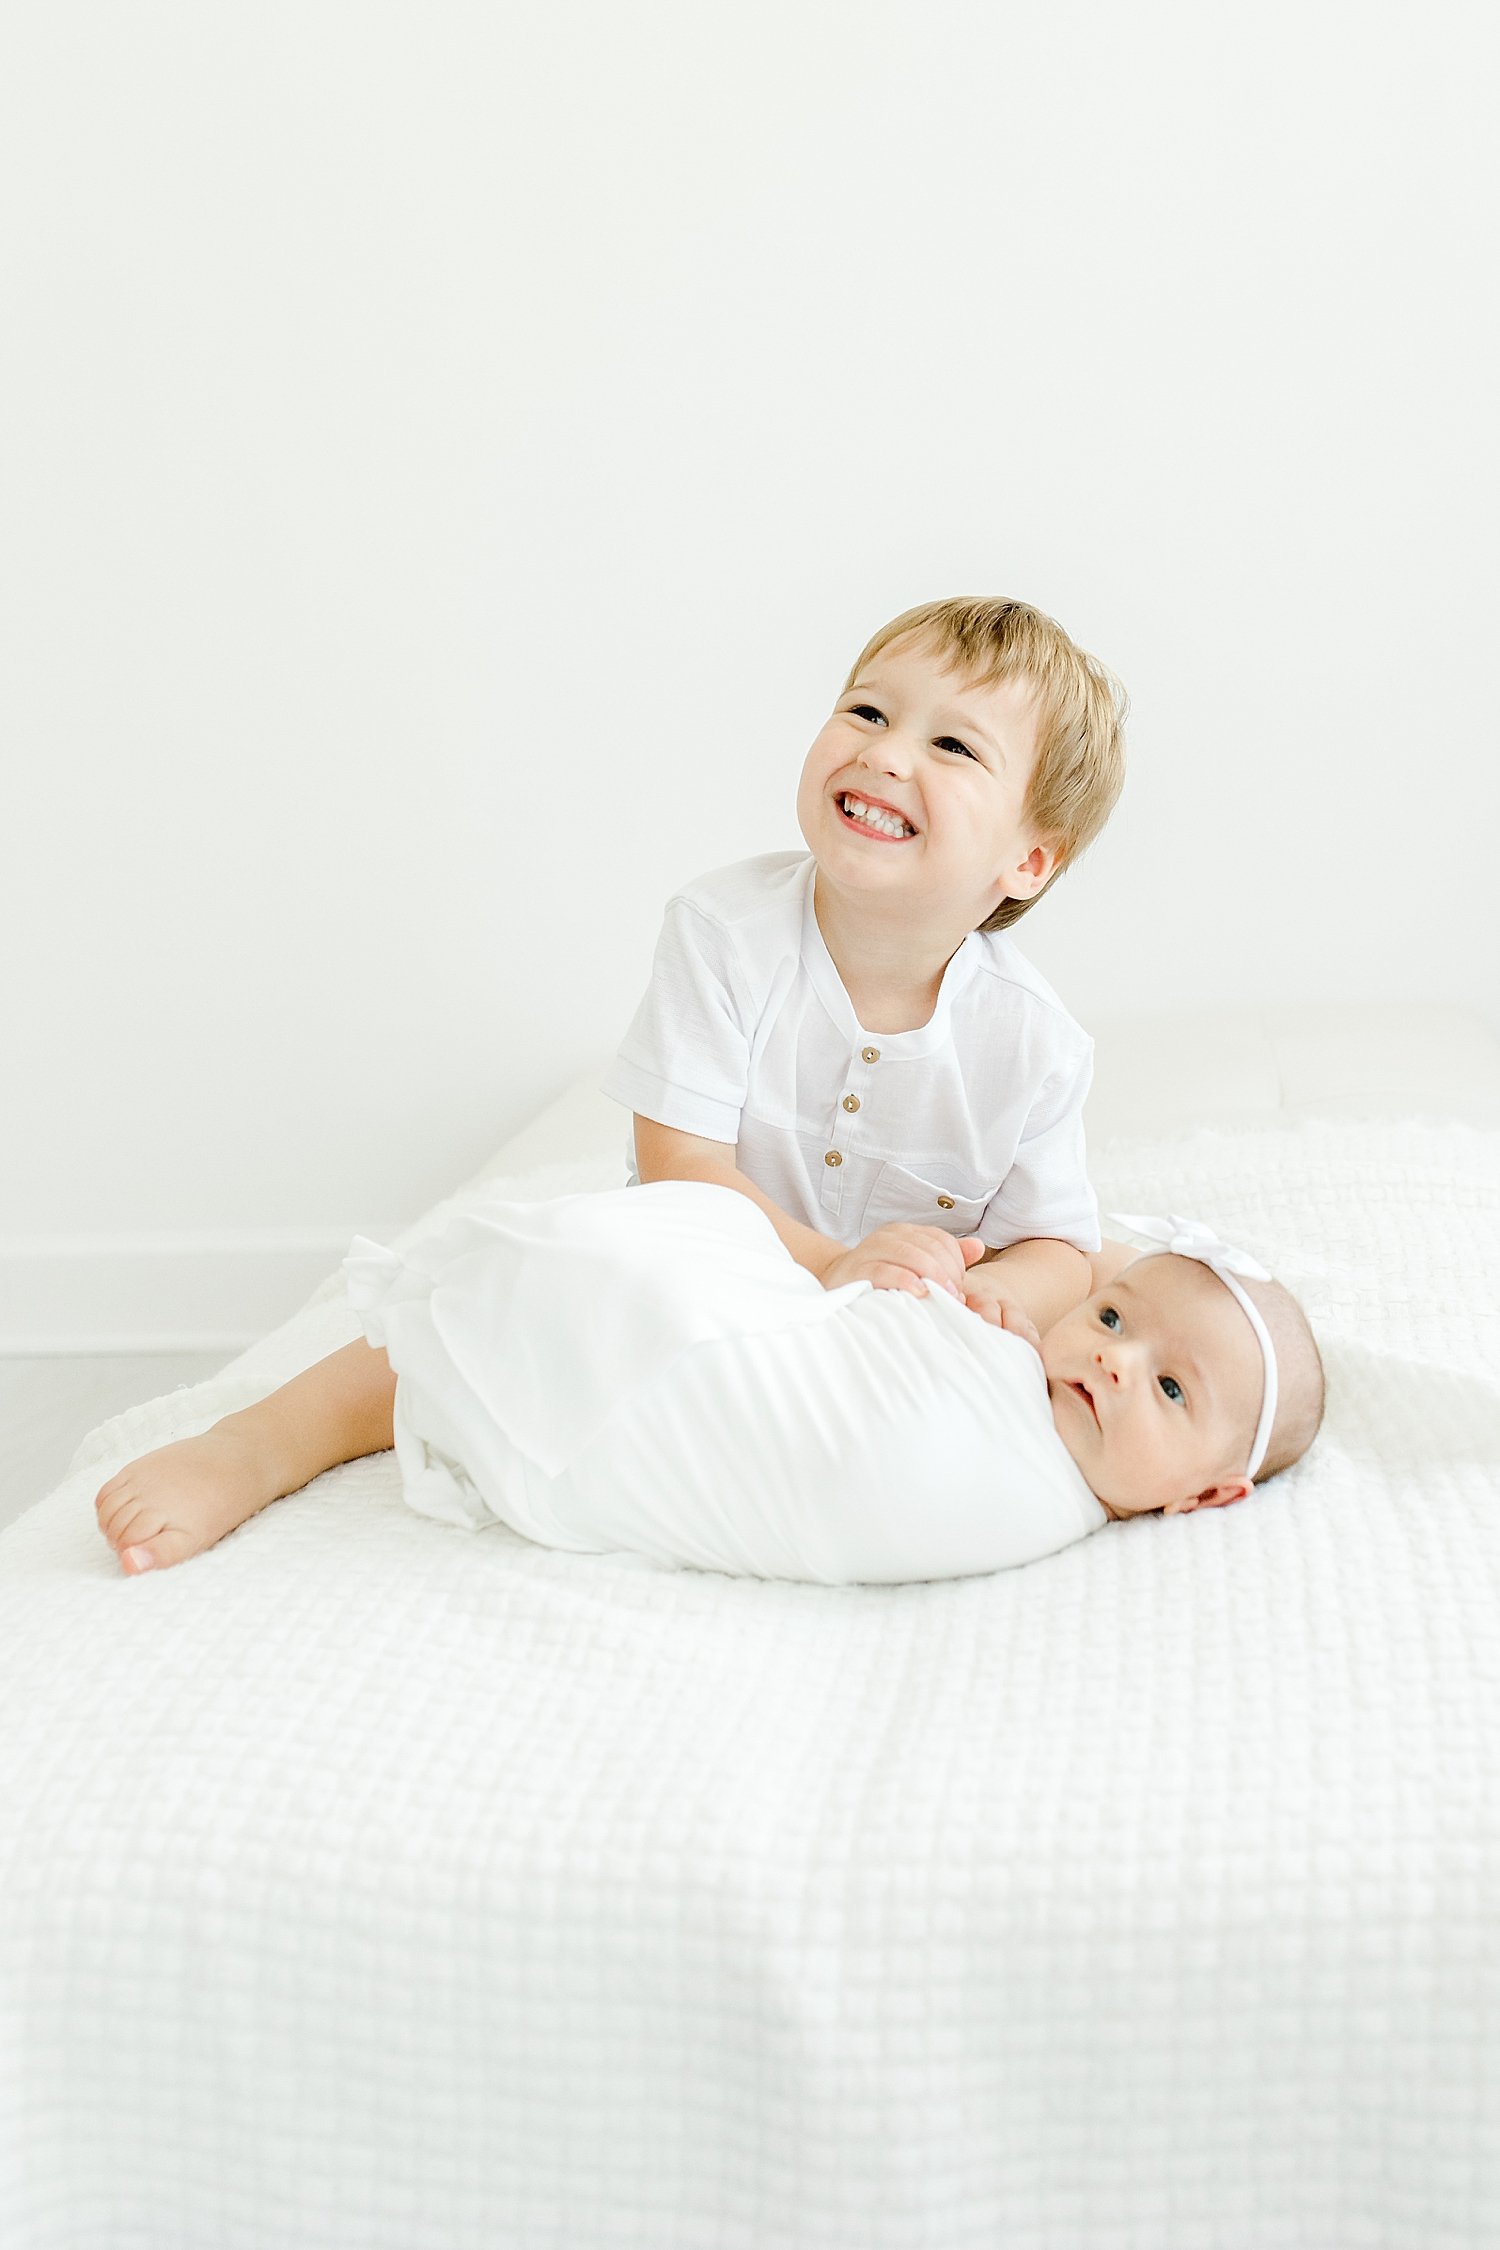 Sibling photos during newborn session in Westport, CT studio | Kristin Wood Photography